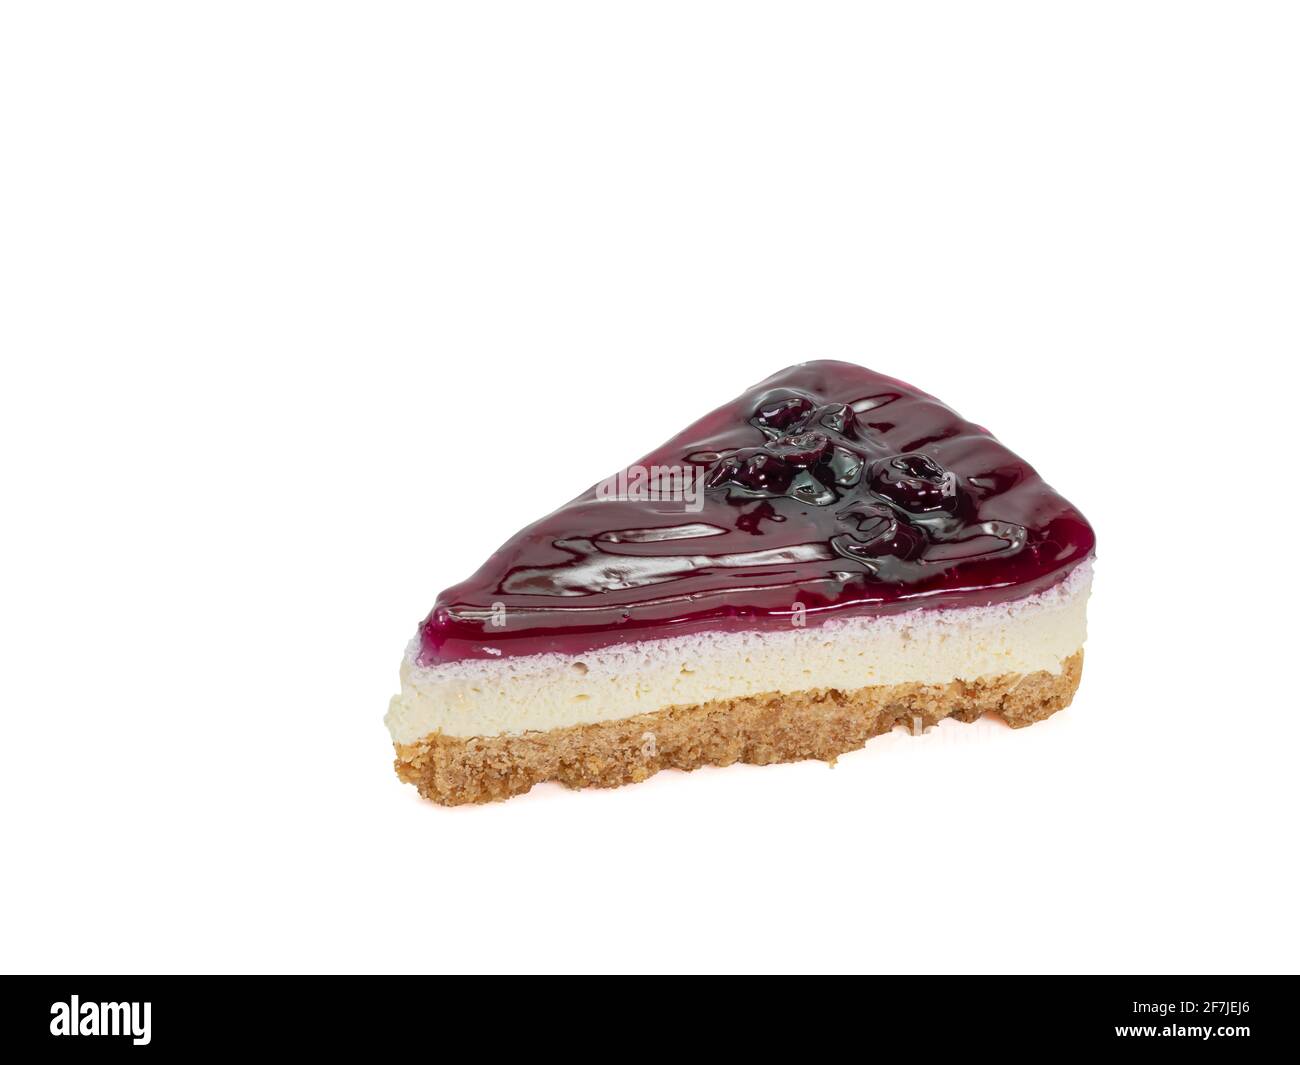 Blueberry cheese pie, a close up of homemade berries cheesecake bakery dessert isolated on white background. Stock Photo